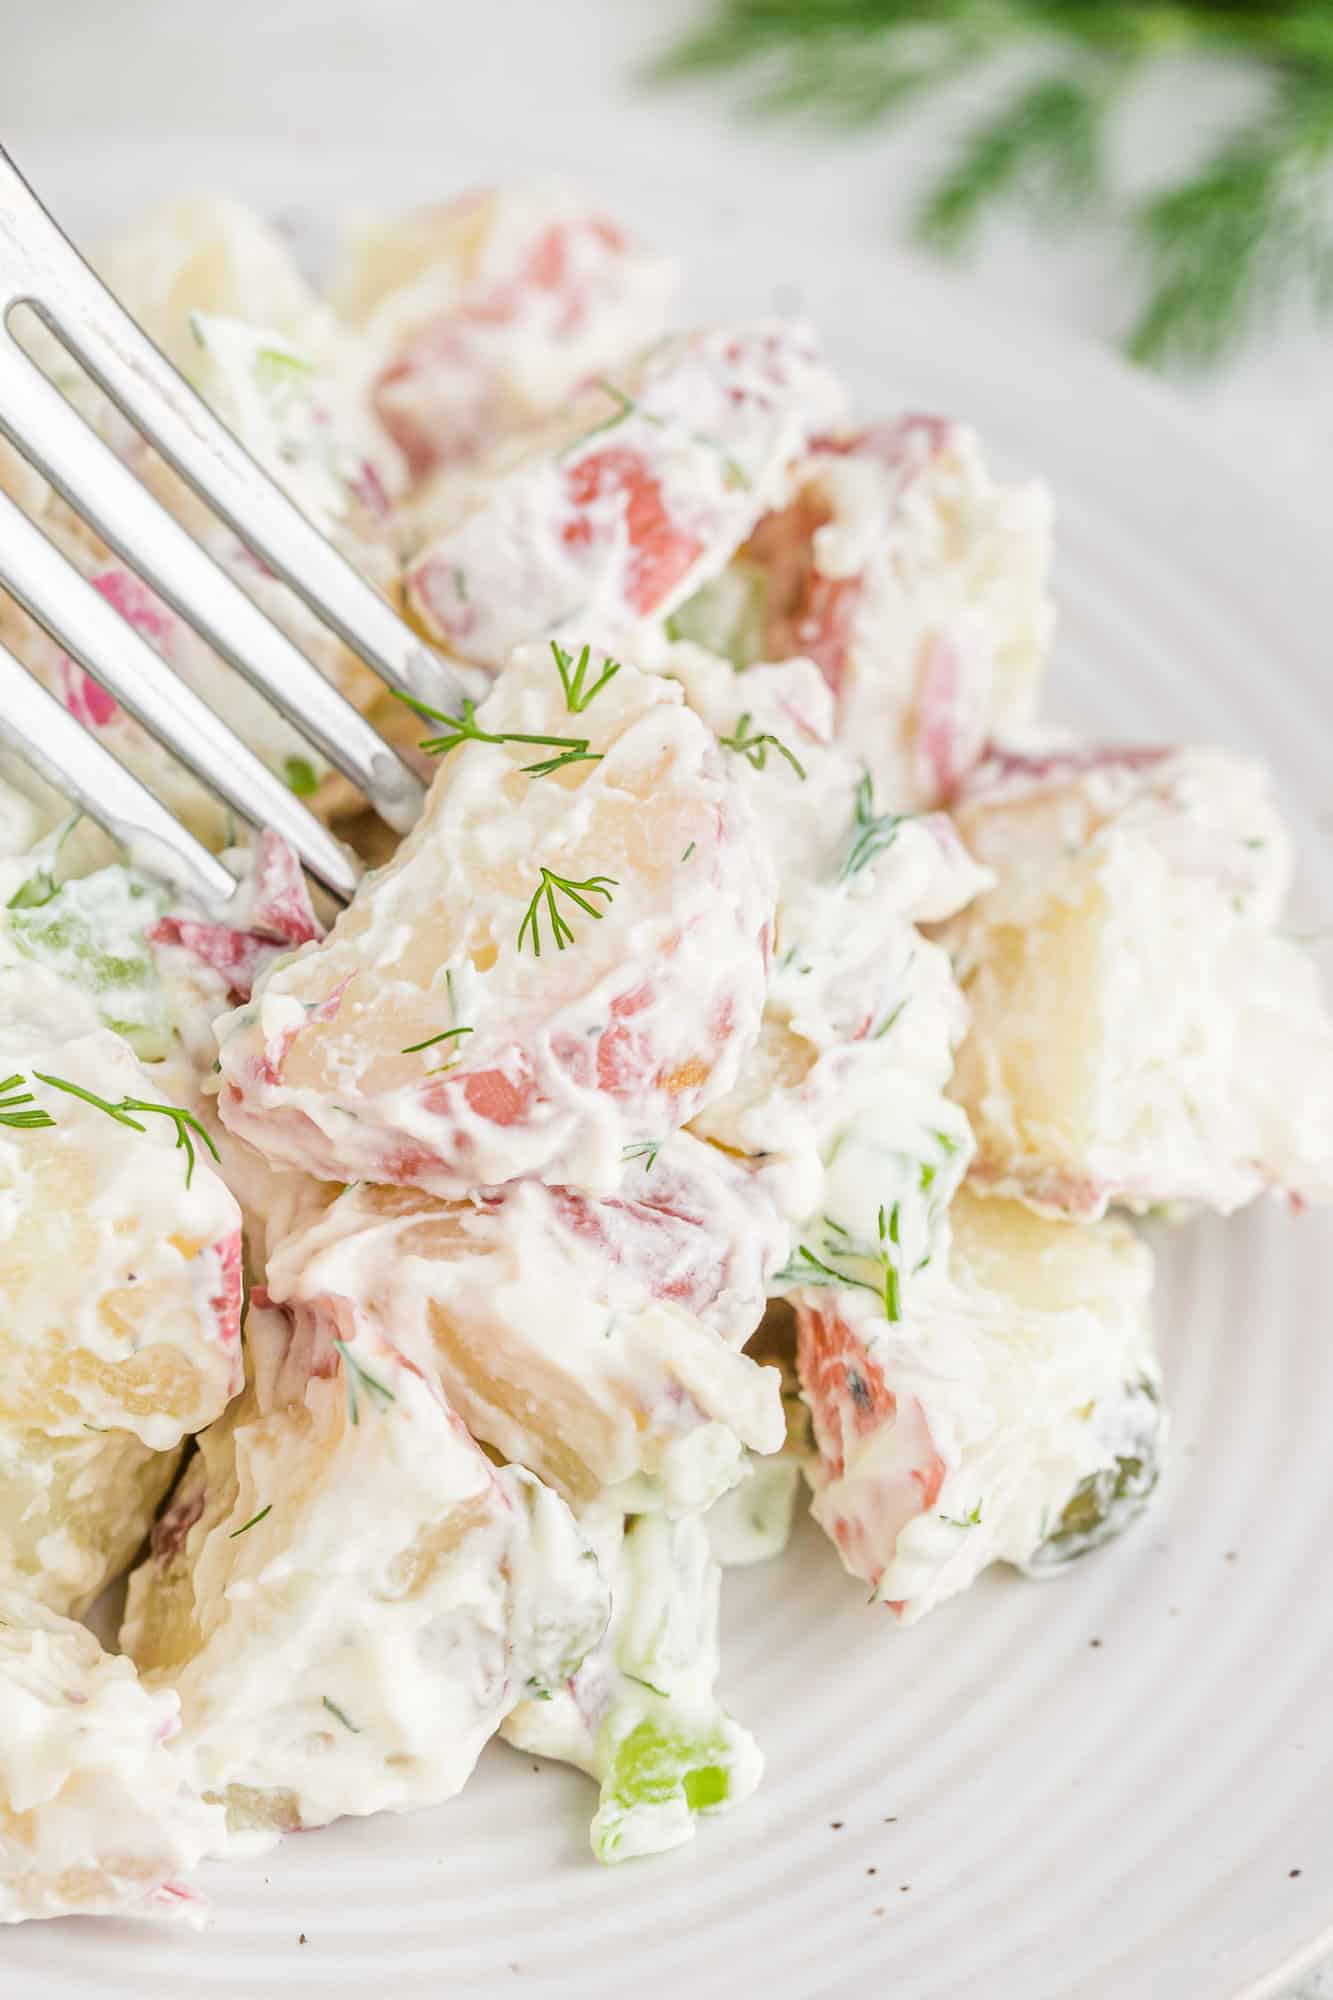 Potato salad on a plate with a fork.